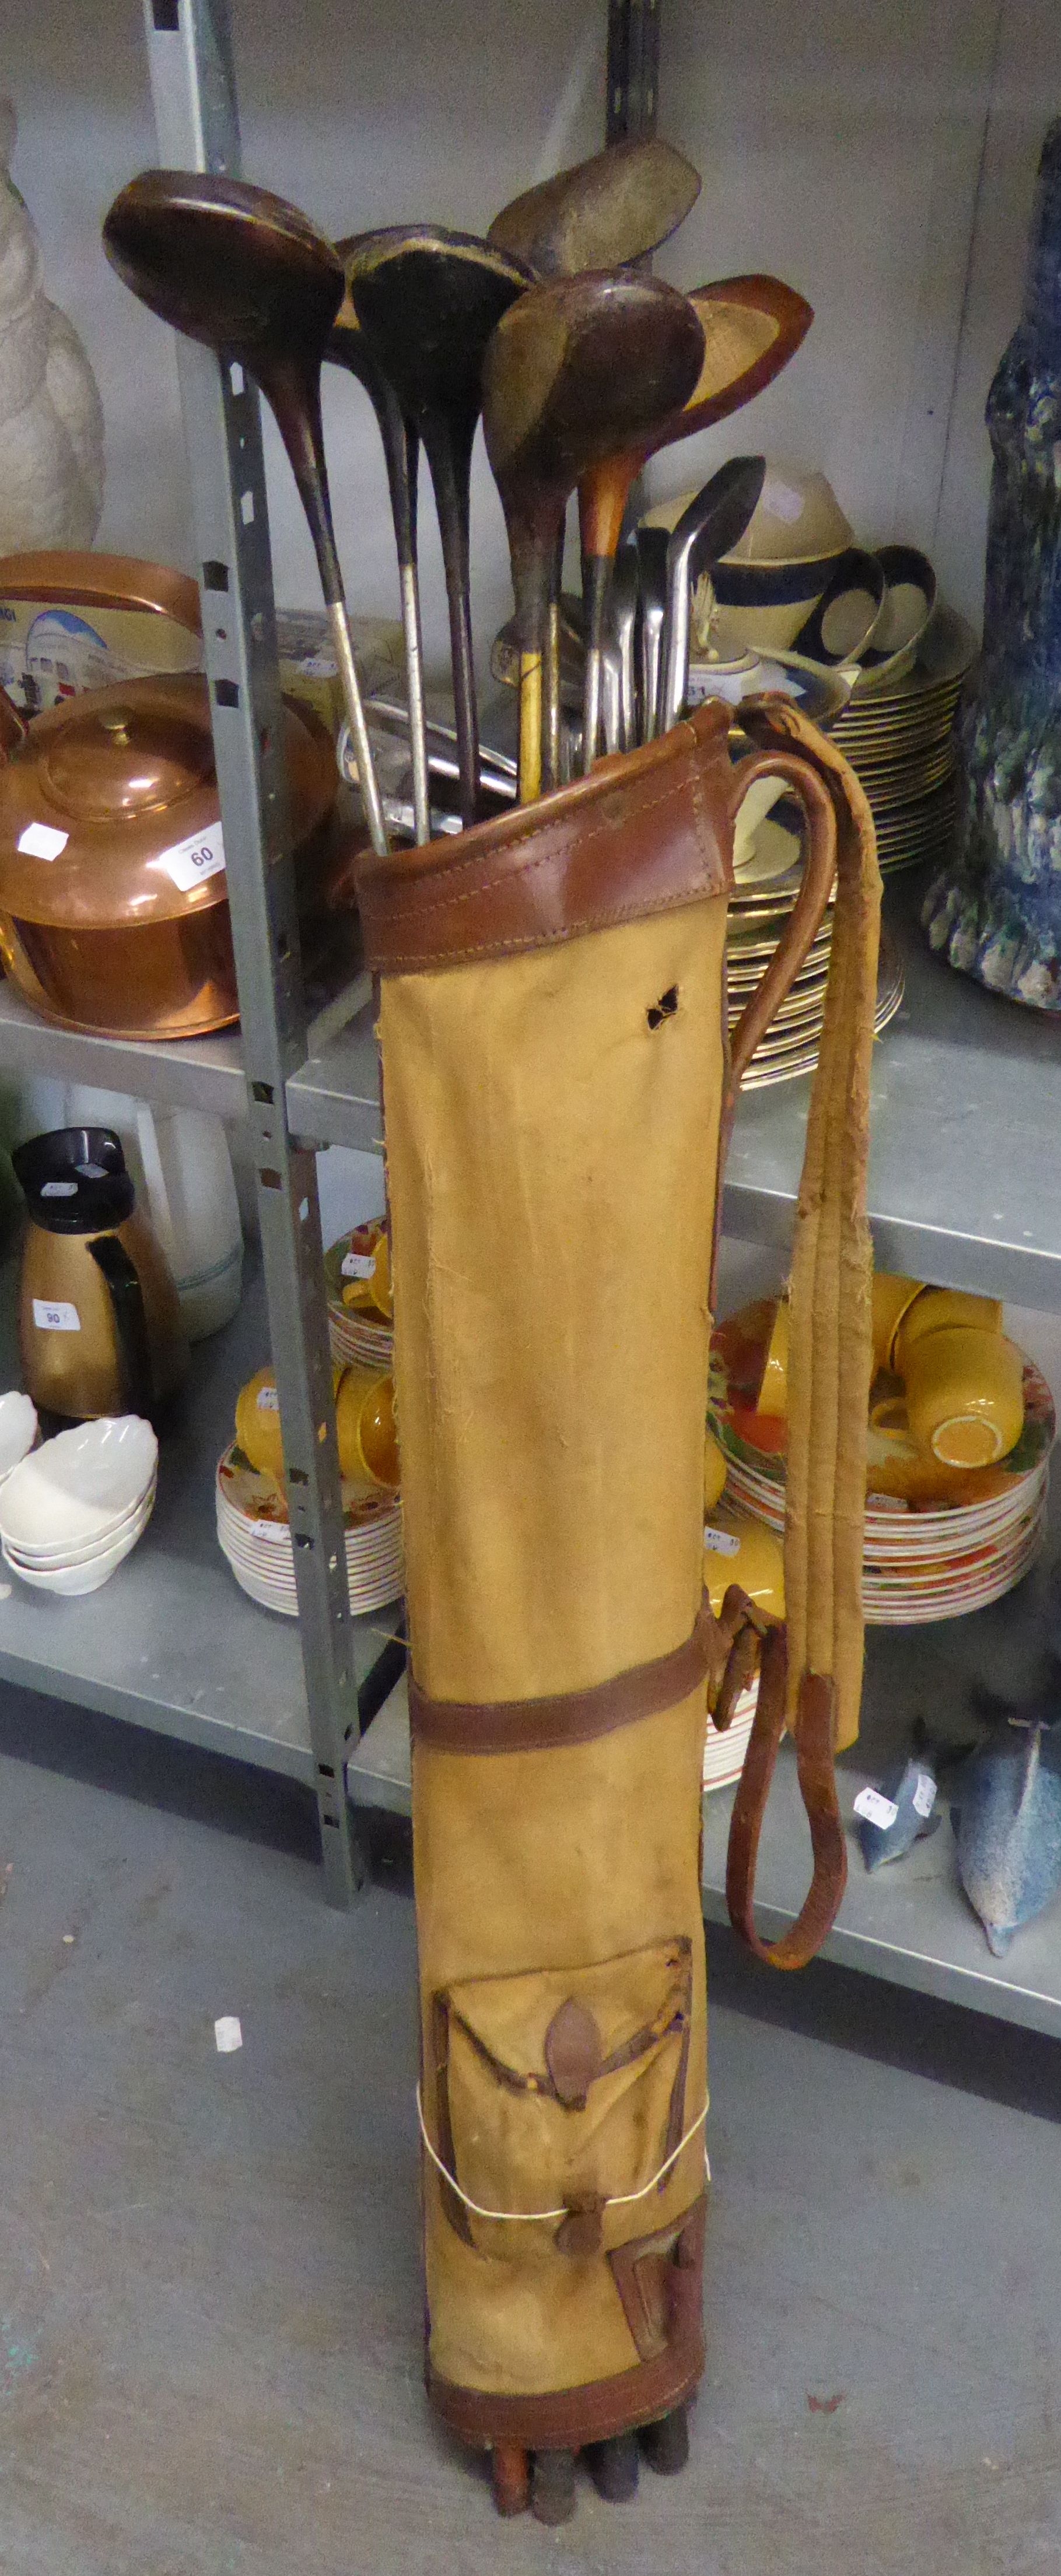 VINTAGE GOLF CLUBS, WOODEN AND METAL SHAFTS AND HEADS IN A CLOTH AND LEATHER BAG. TOGETHER WITH - Image 2 of 2